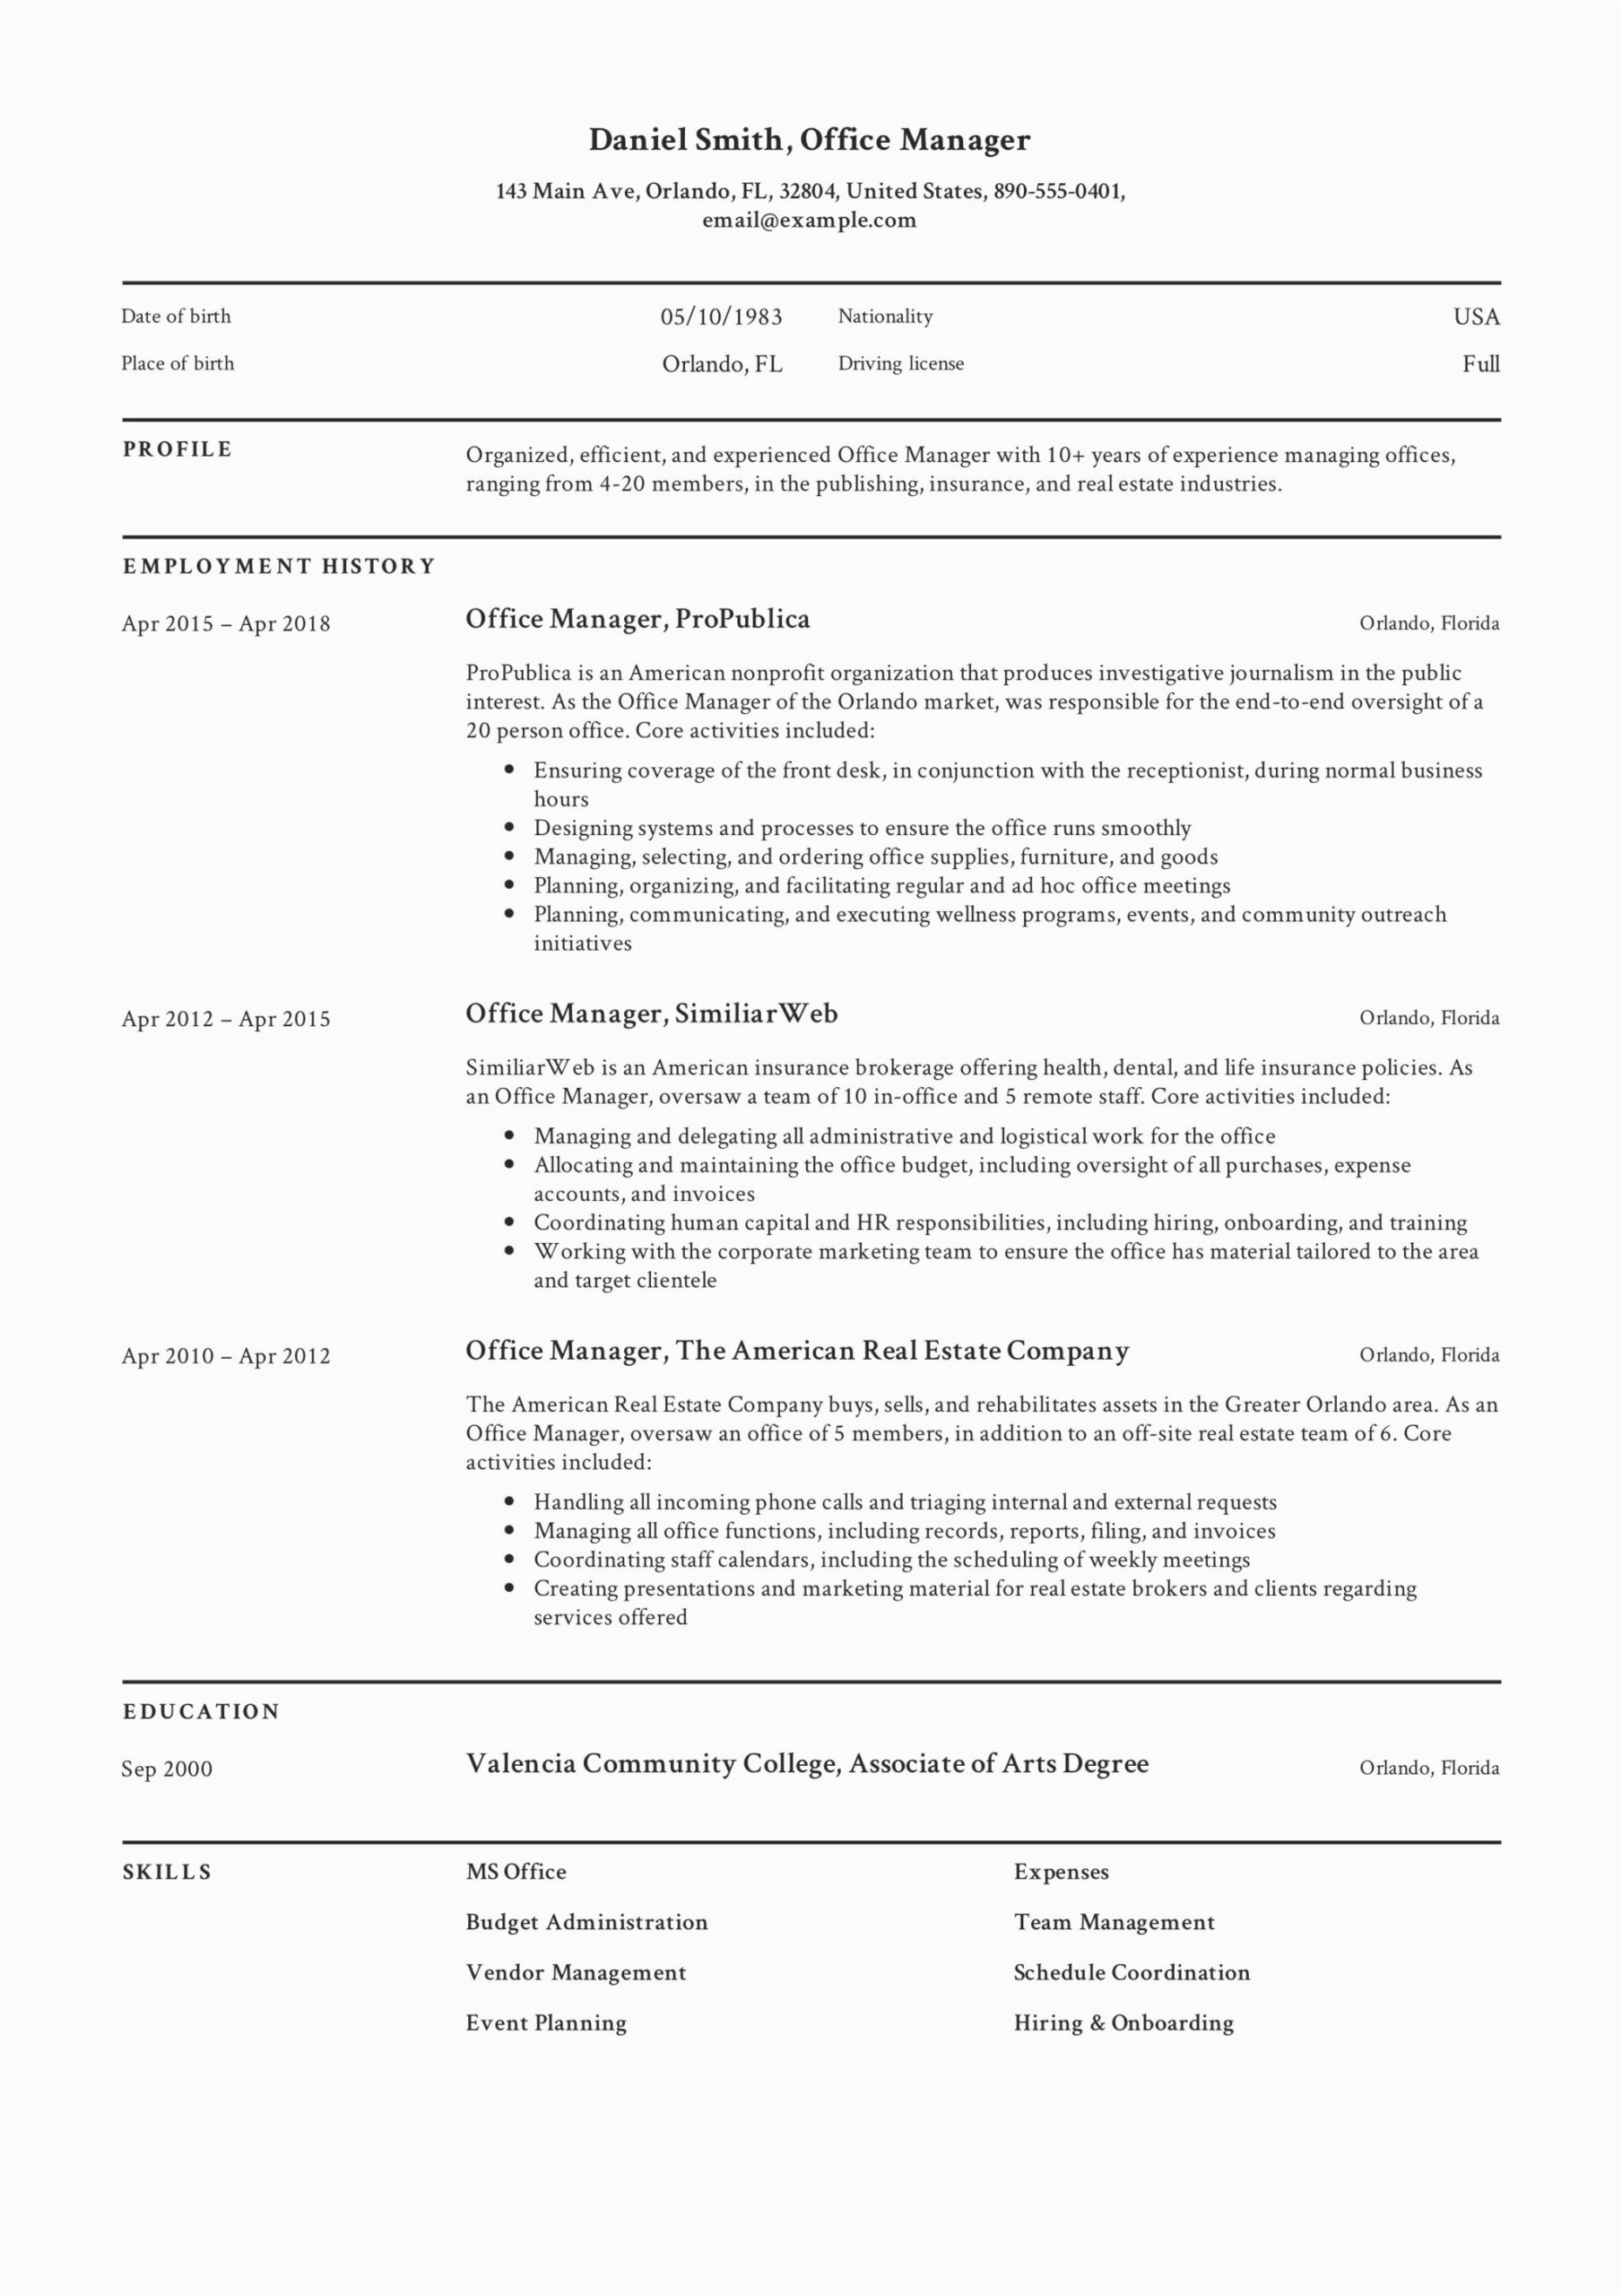 Office Manager Job Responsibilities Resume Sample Guide Fice Manager Resume [ 12 Samples ] Pdf